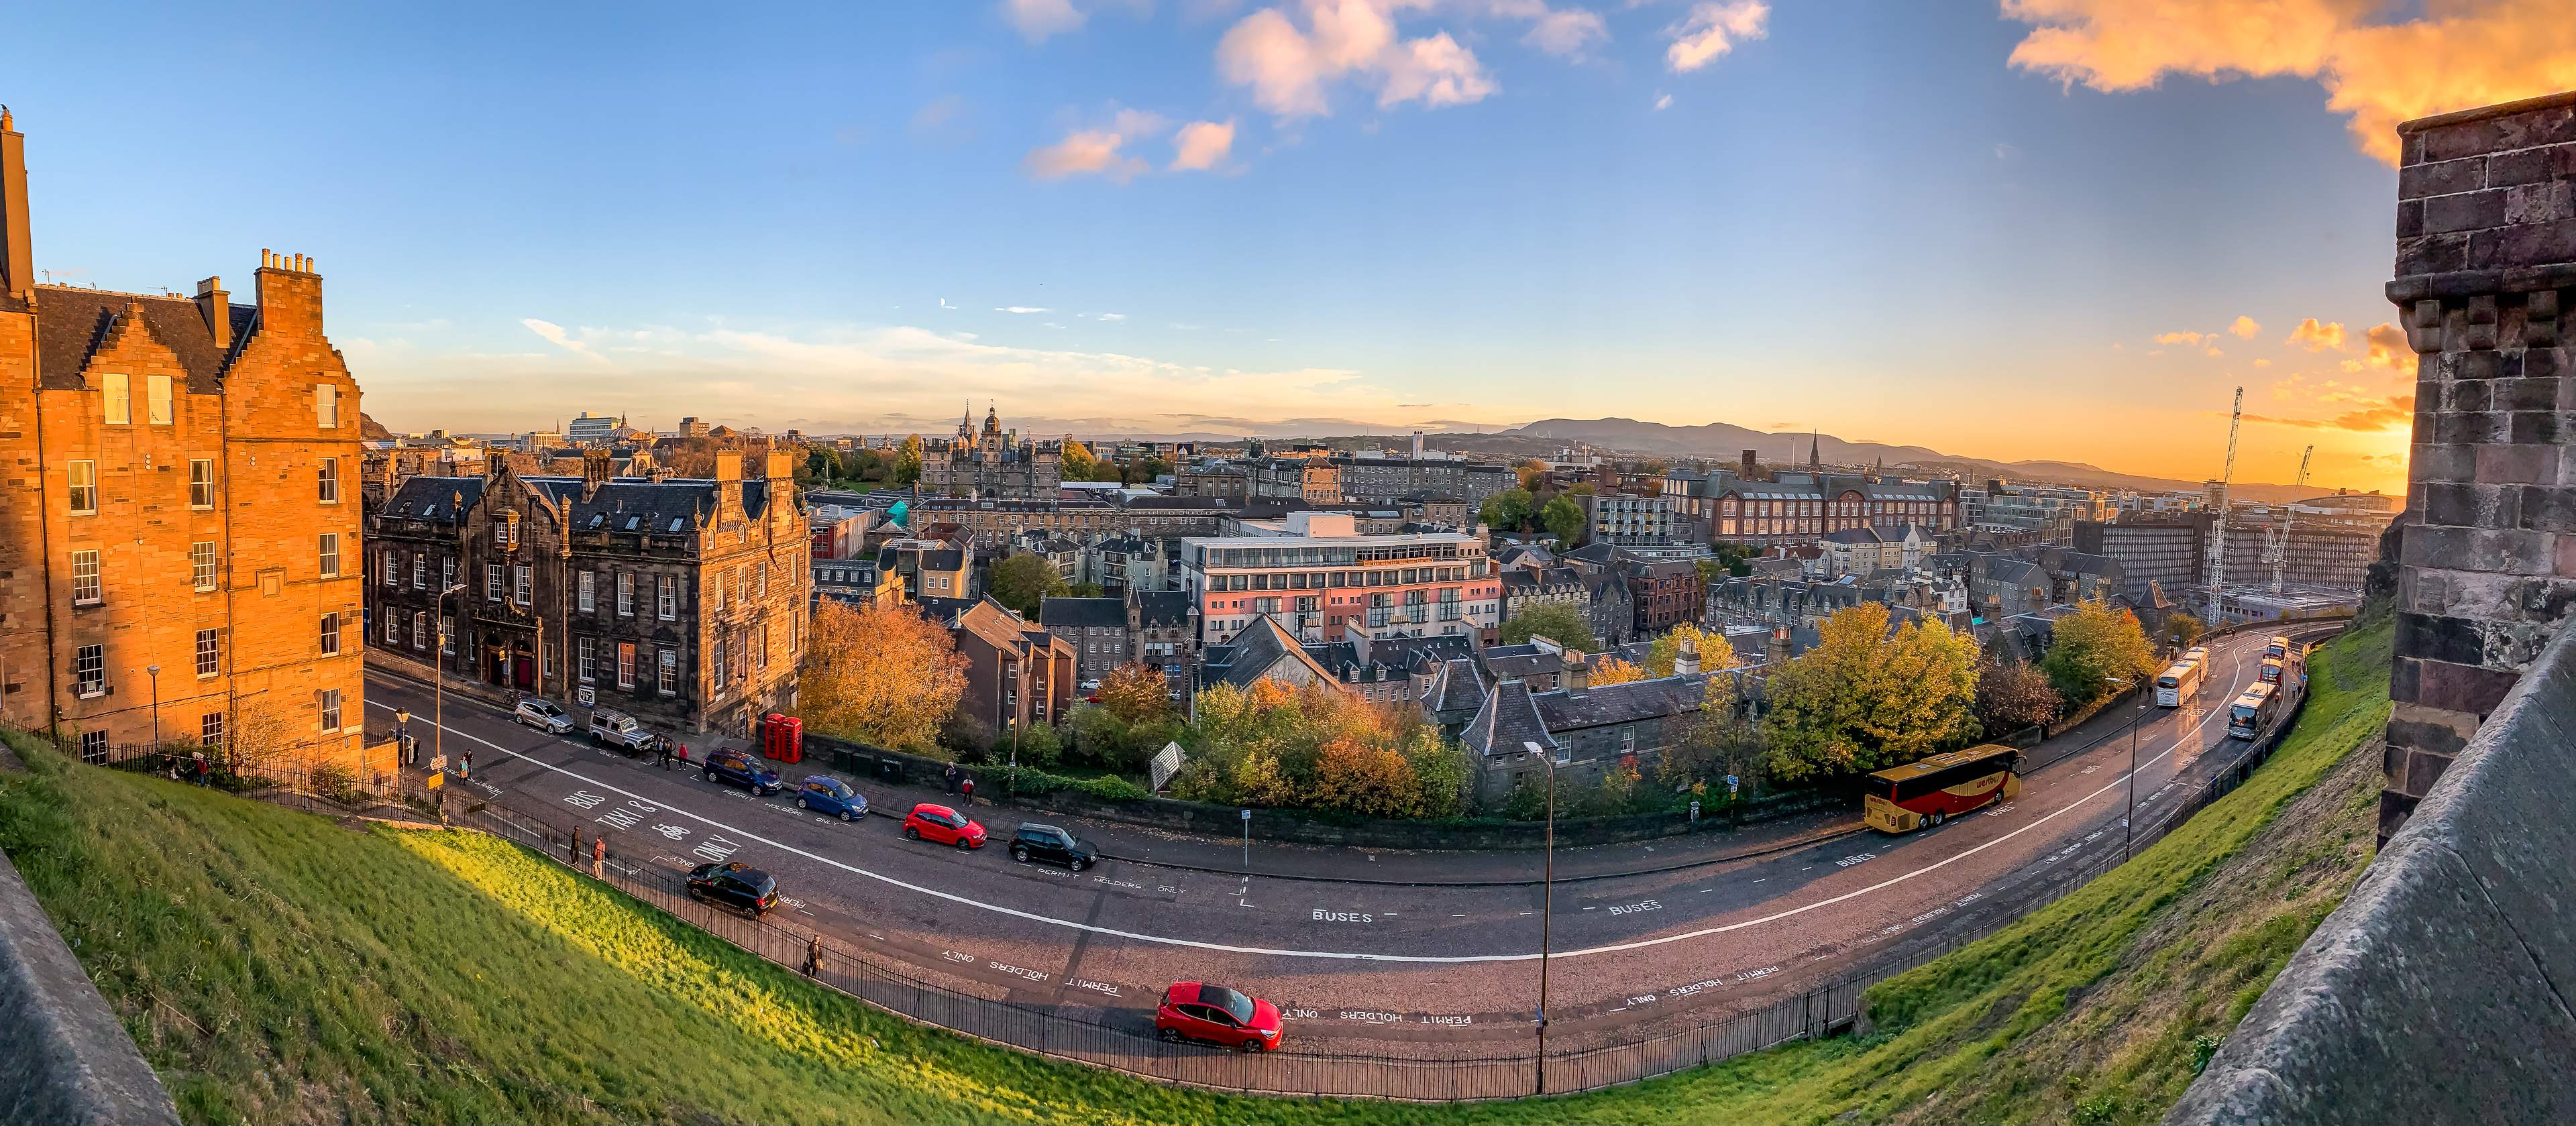 Panoramic view on the south side of the city, seen from the Edinburgh Castle, Scotland, UK